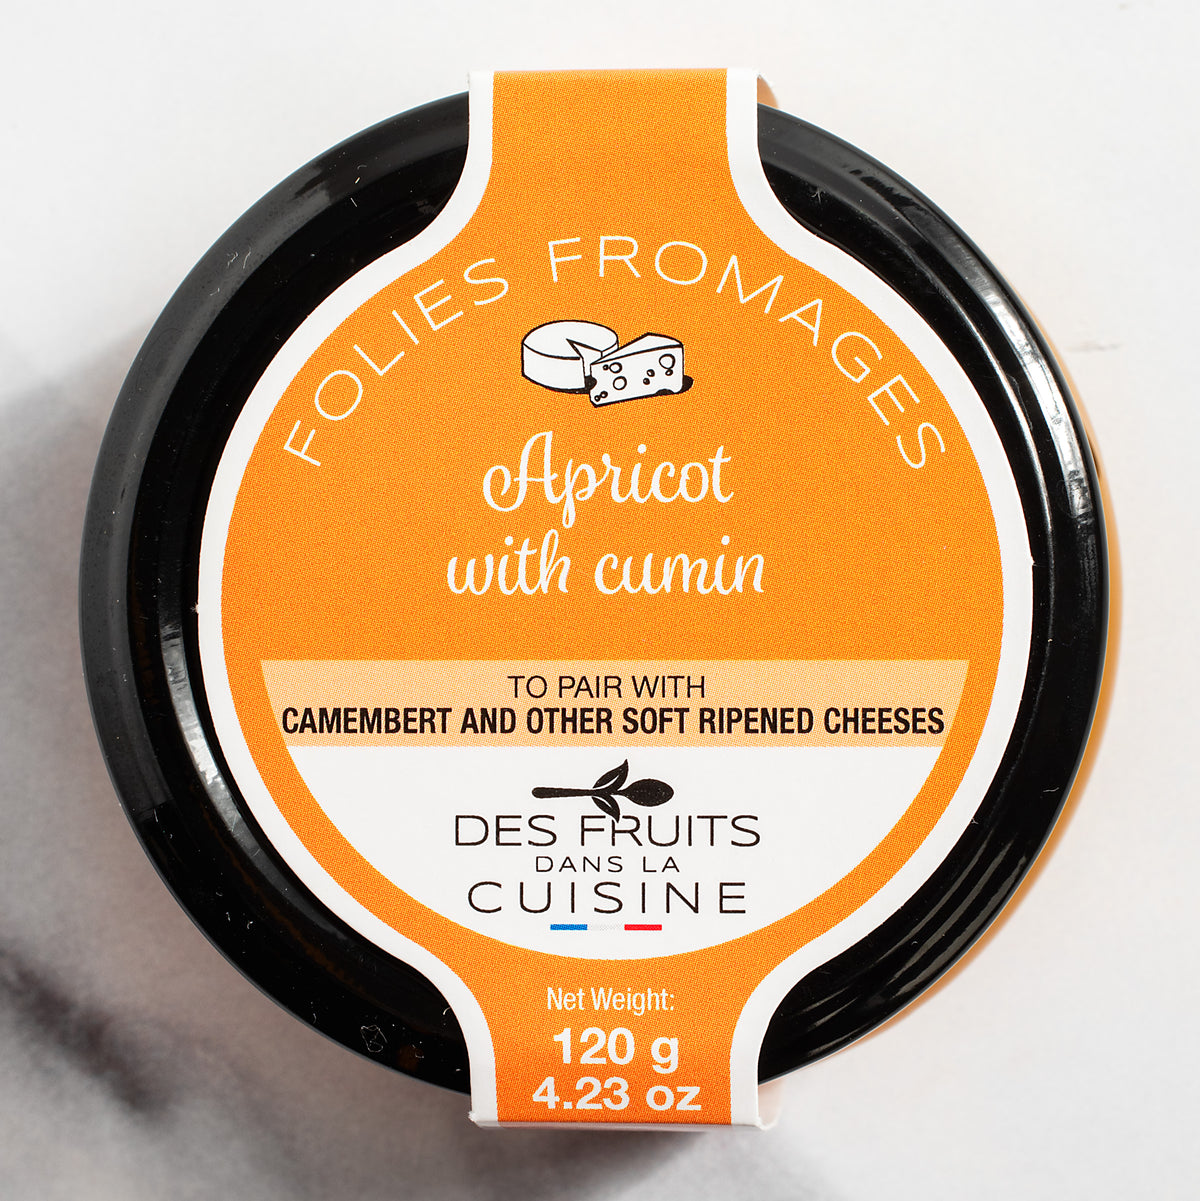 https://www.igourmetus.shop/wp-content/uploads/1692/75/every-customer-is-treated-as-if-they-were-a-part-of-our-family-helping-people-to-find-the-french-apricot-cumin-spread-for-camembert-brie-cheeses-folies-fromages_2.jpg